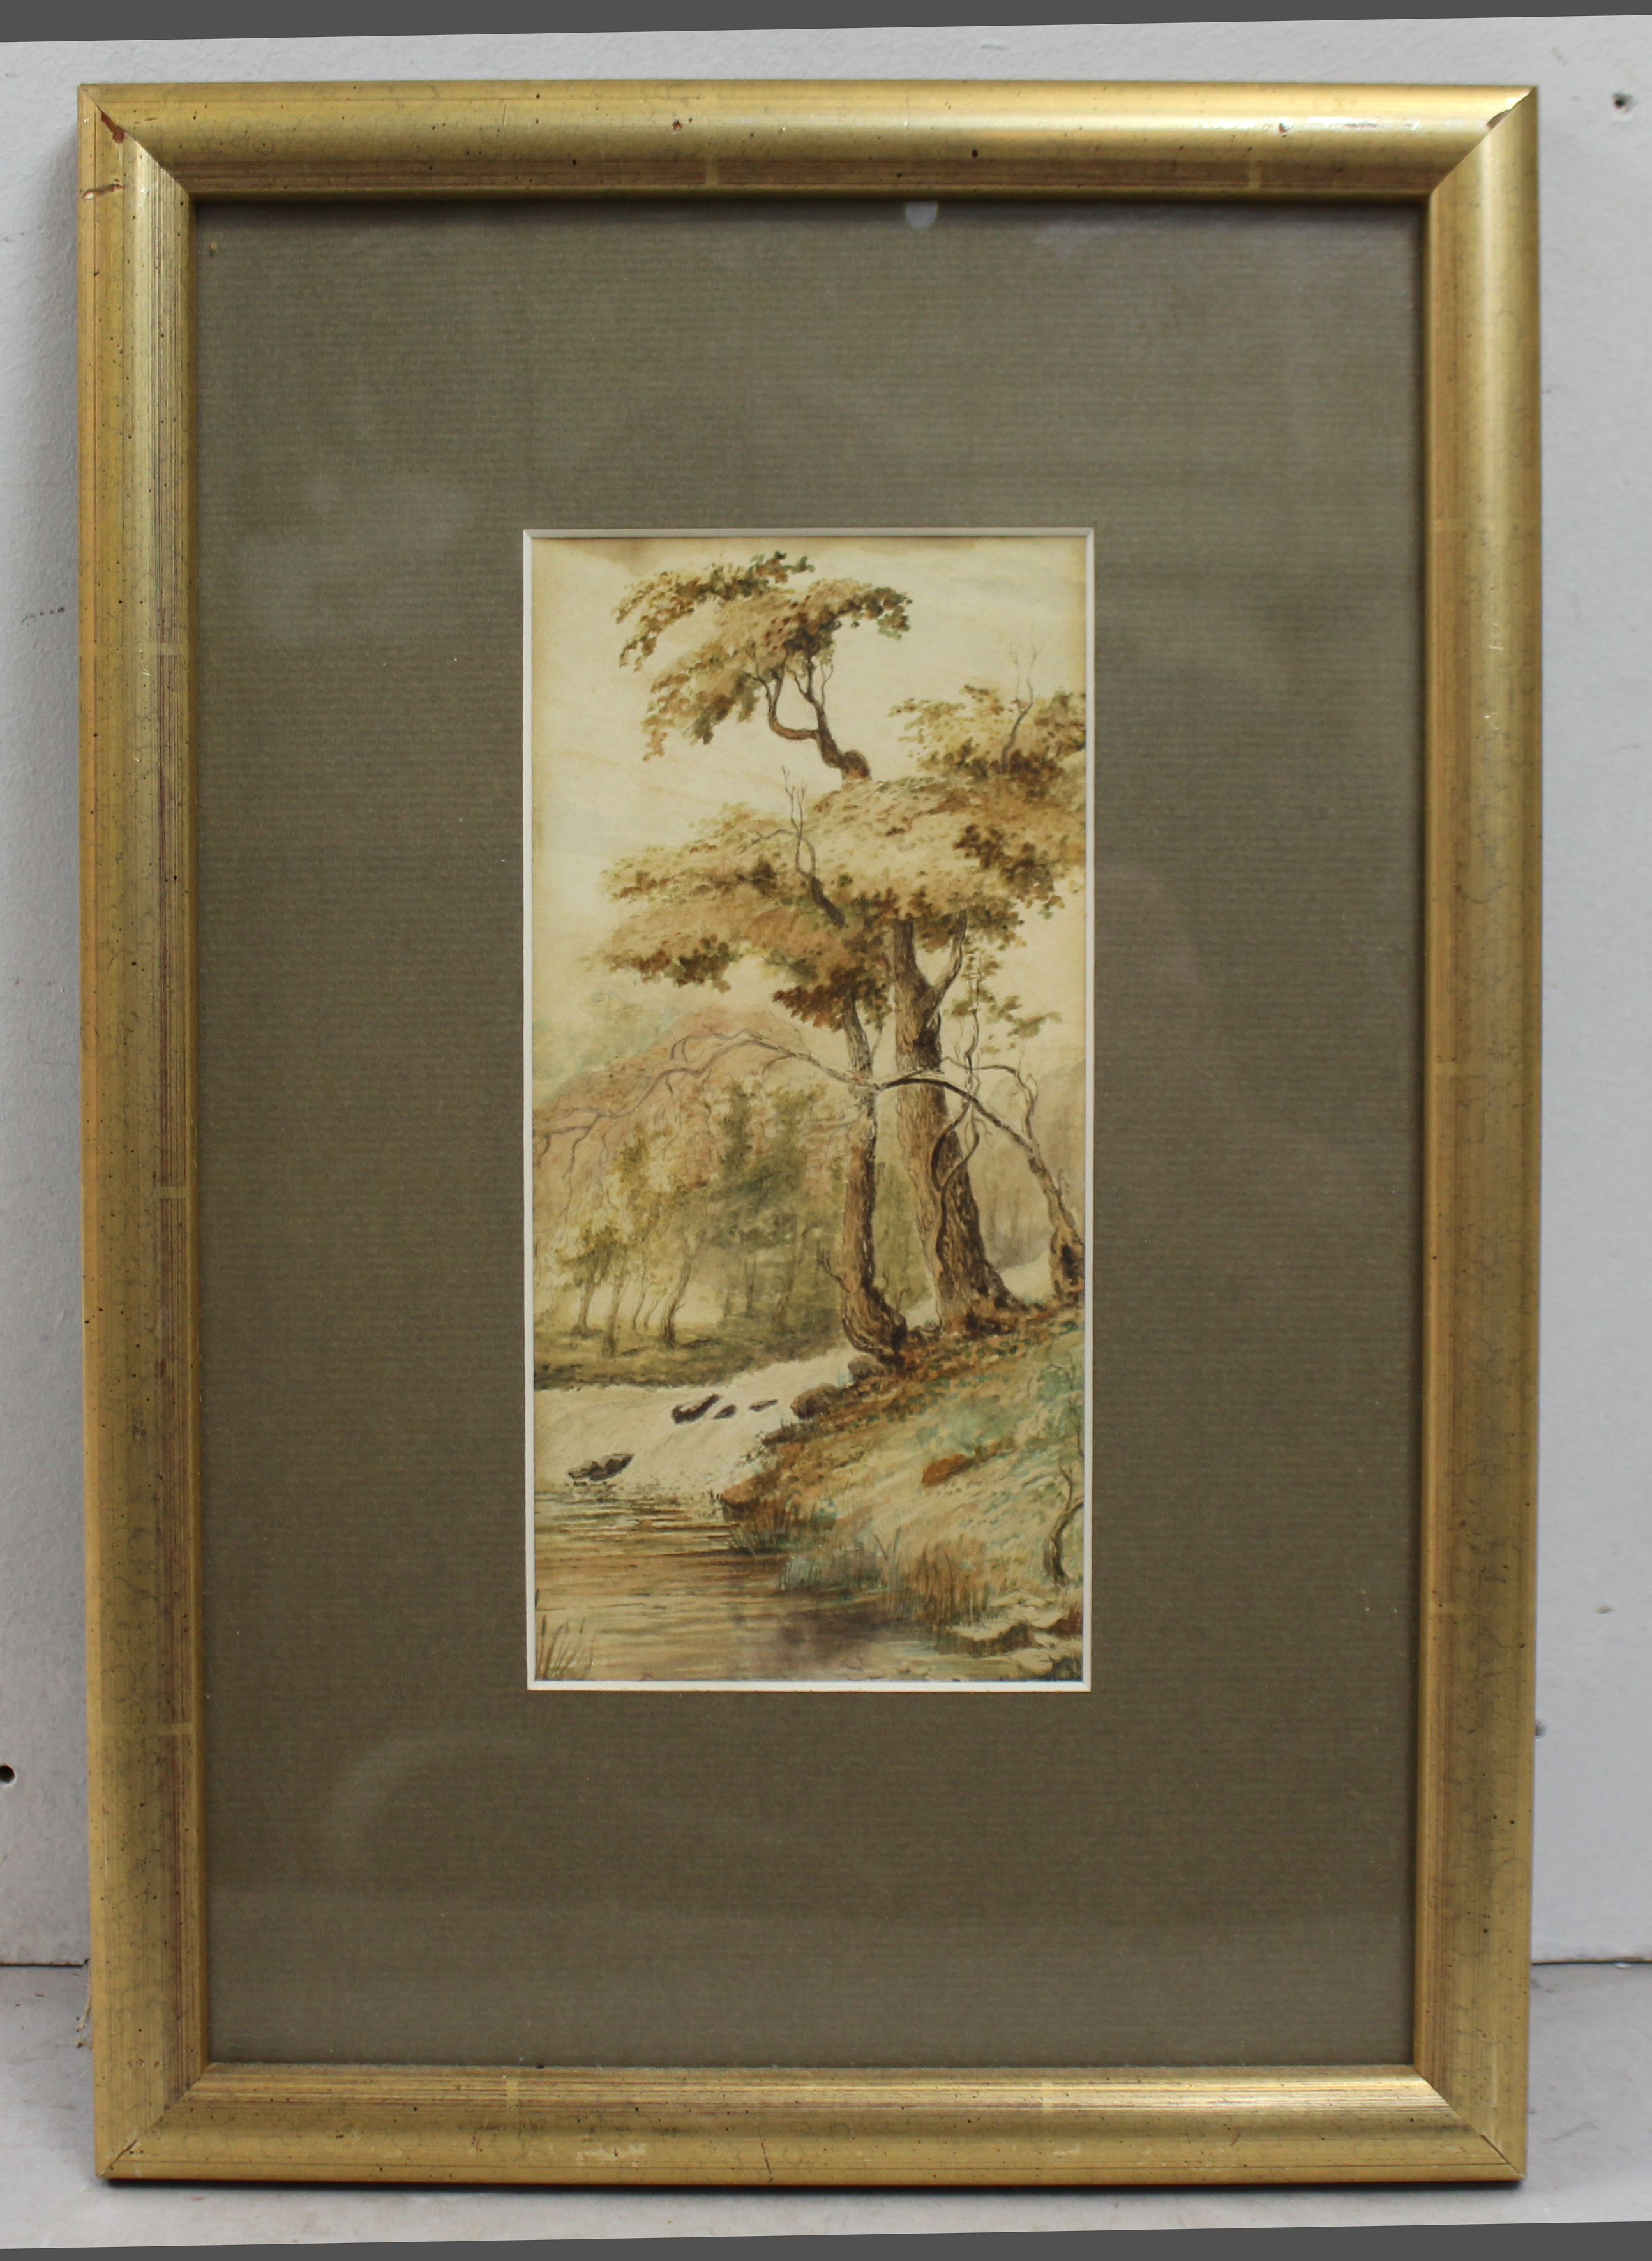 Early 20th c. Watercolour Tree by River Bank - Image 3 of 3